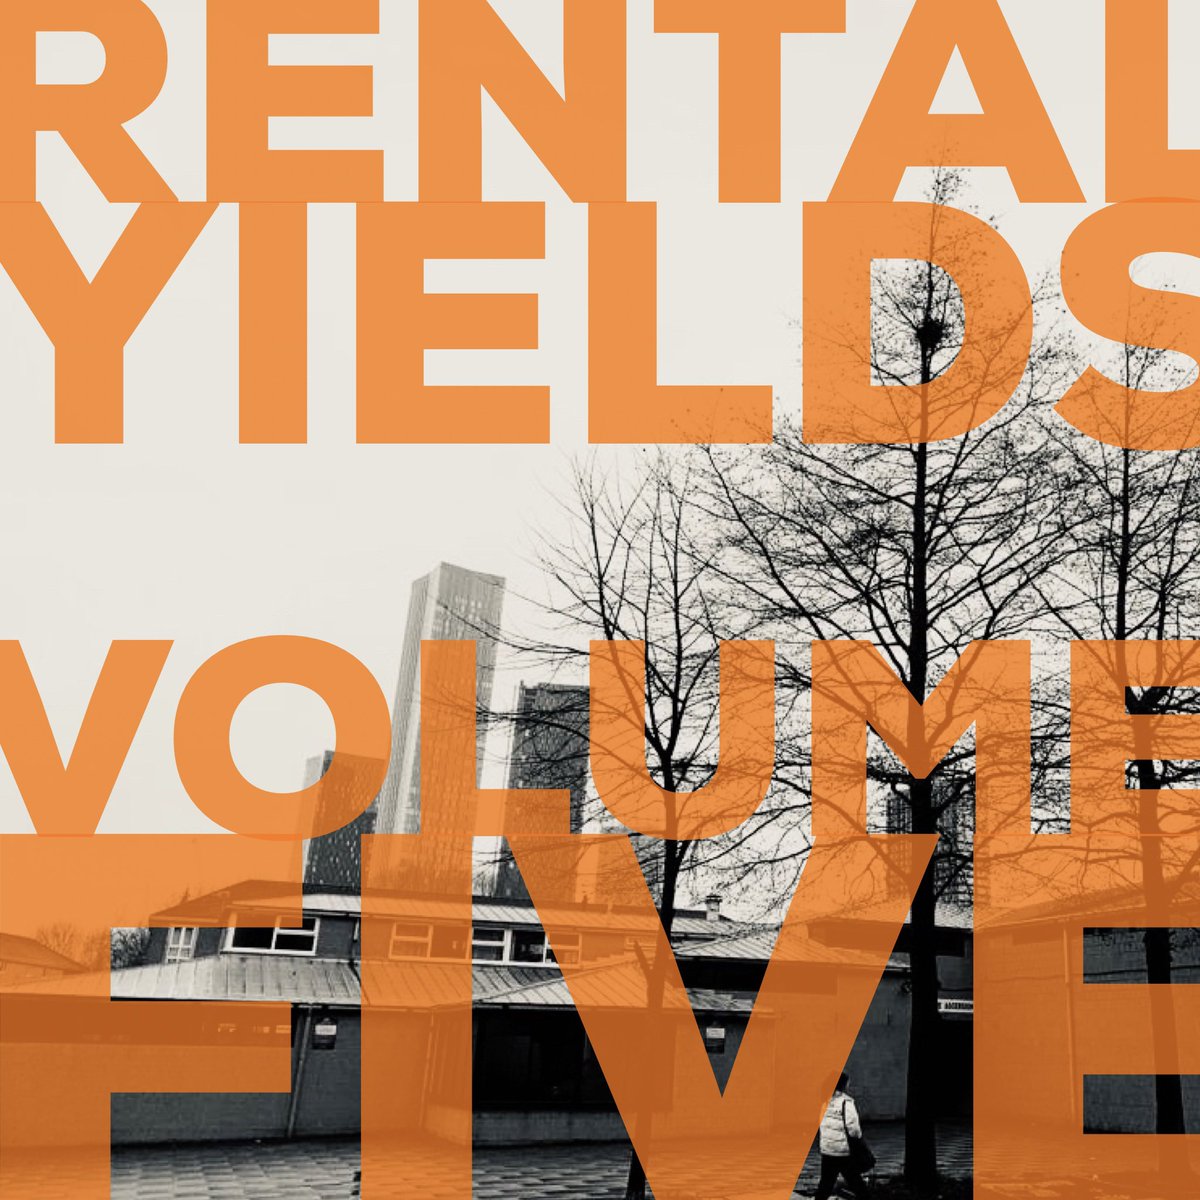 RENTAL YIELDS VOLUME FIVE is ready, but we’ll wait til next week to say more cos of Bandcamp Friday NOISE and stuff.